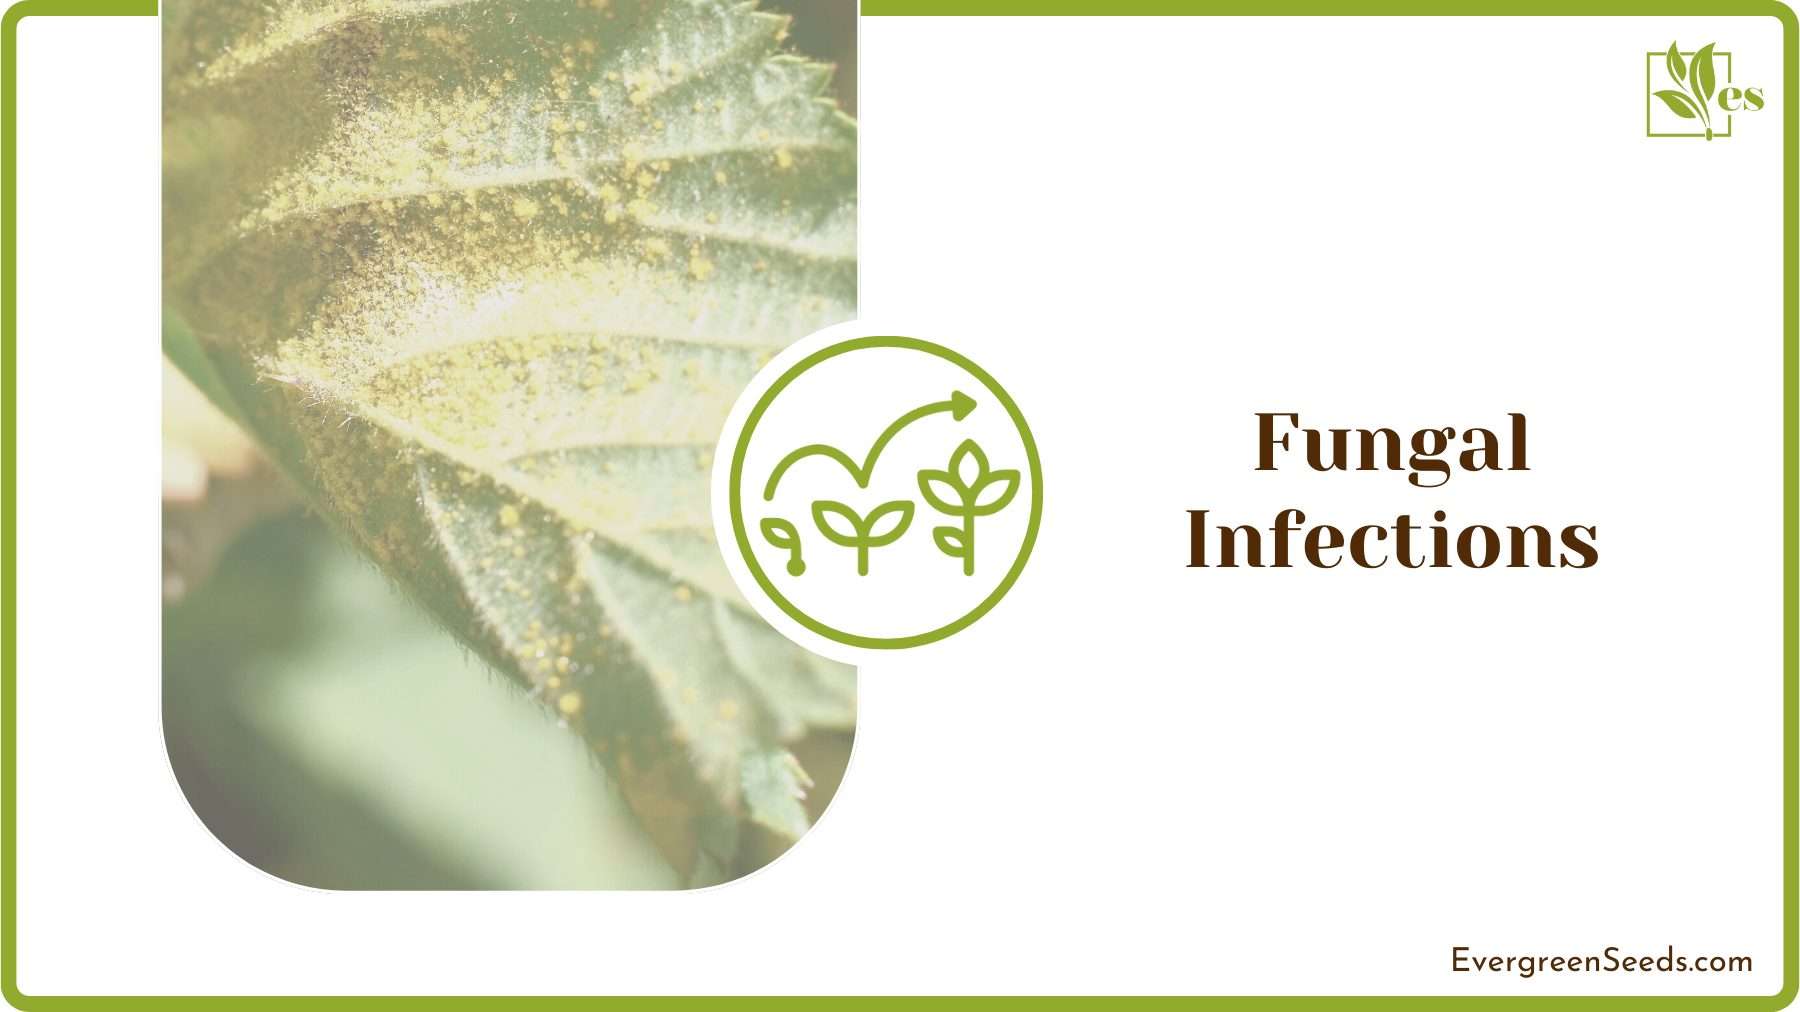 Preventing Fungal Infections